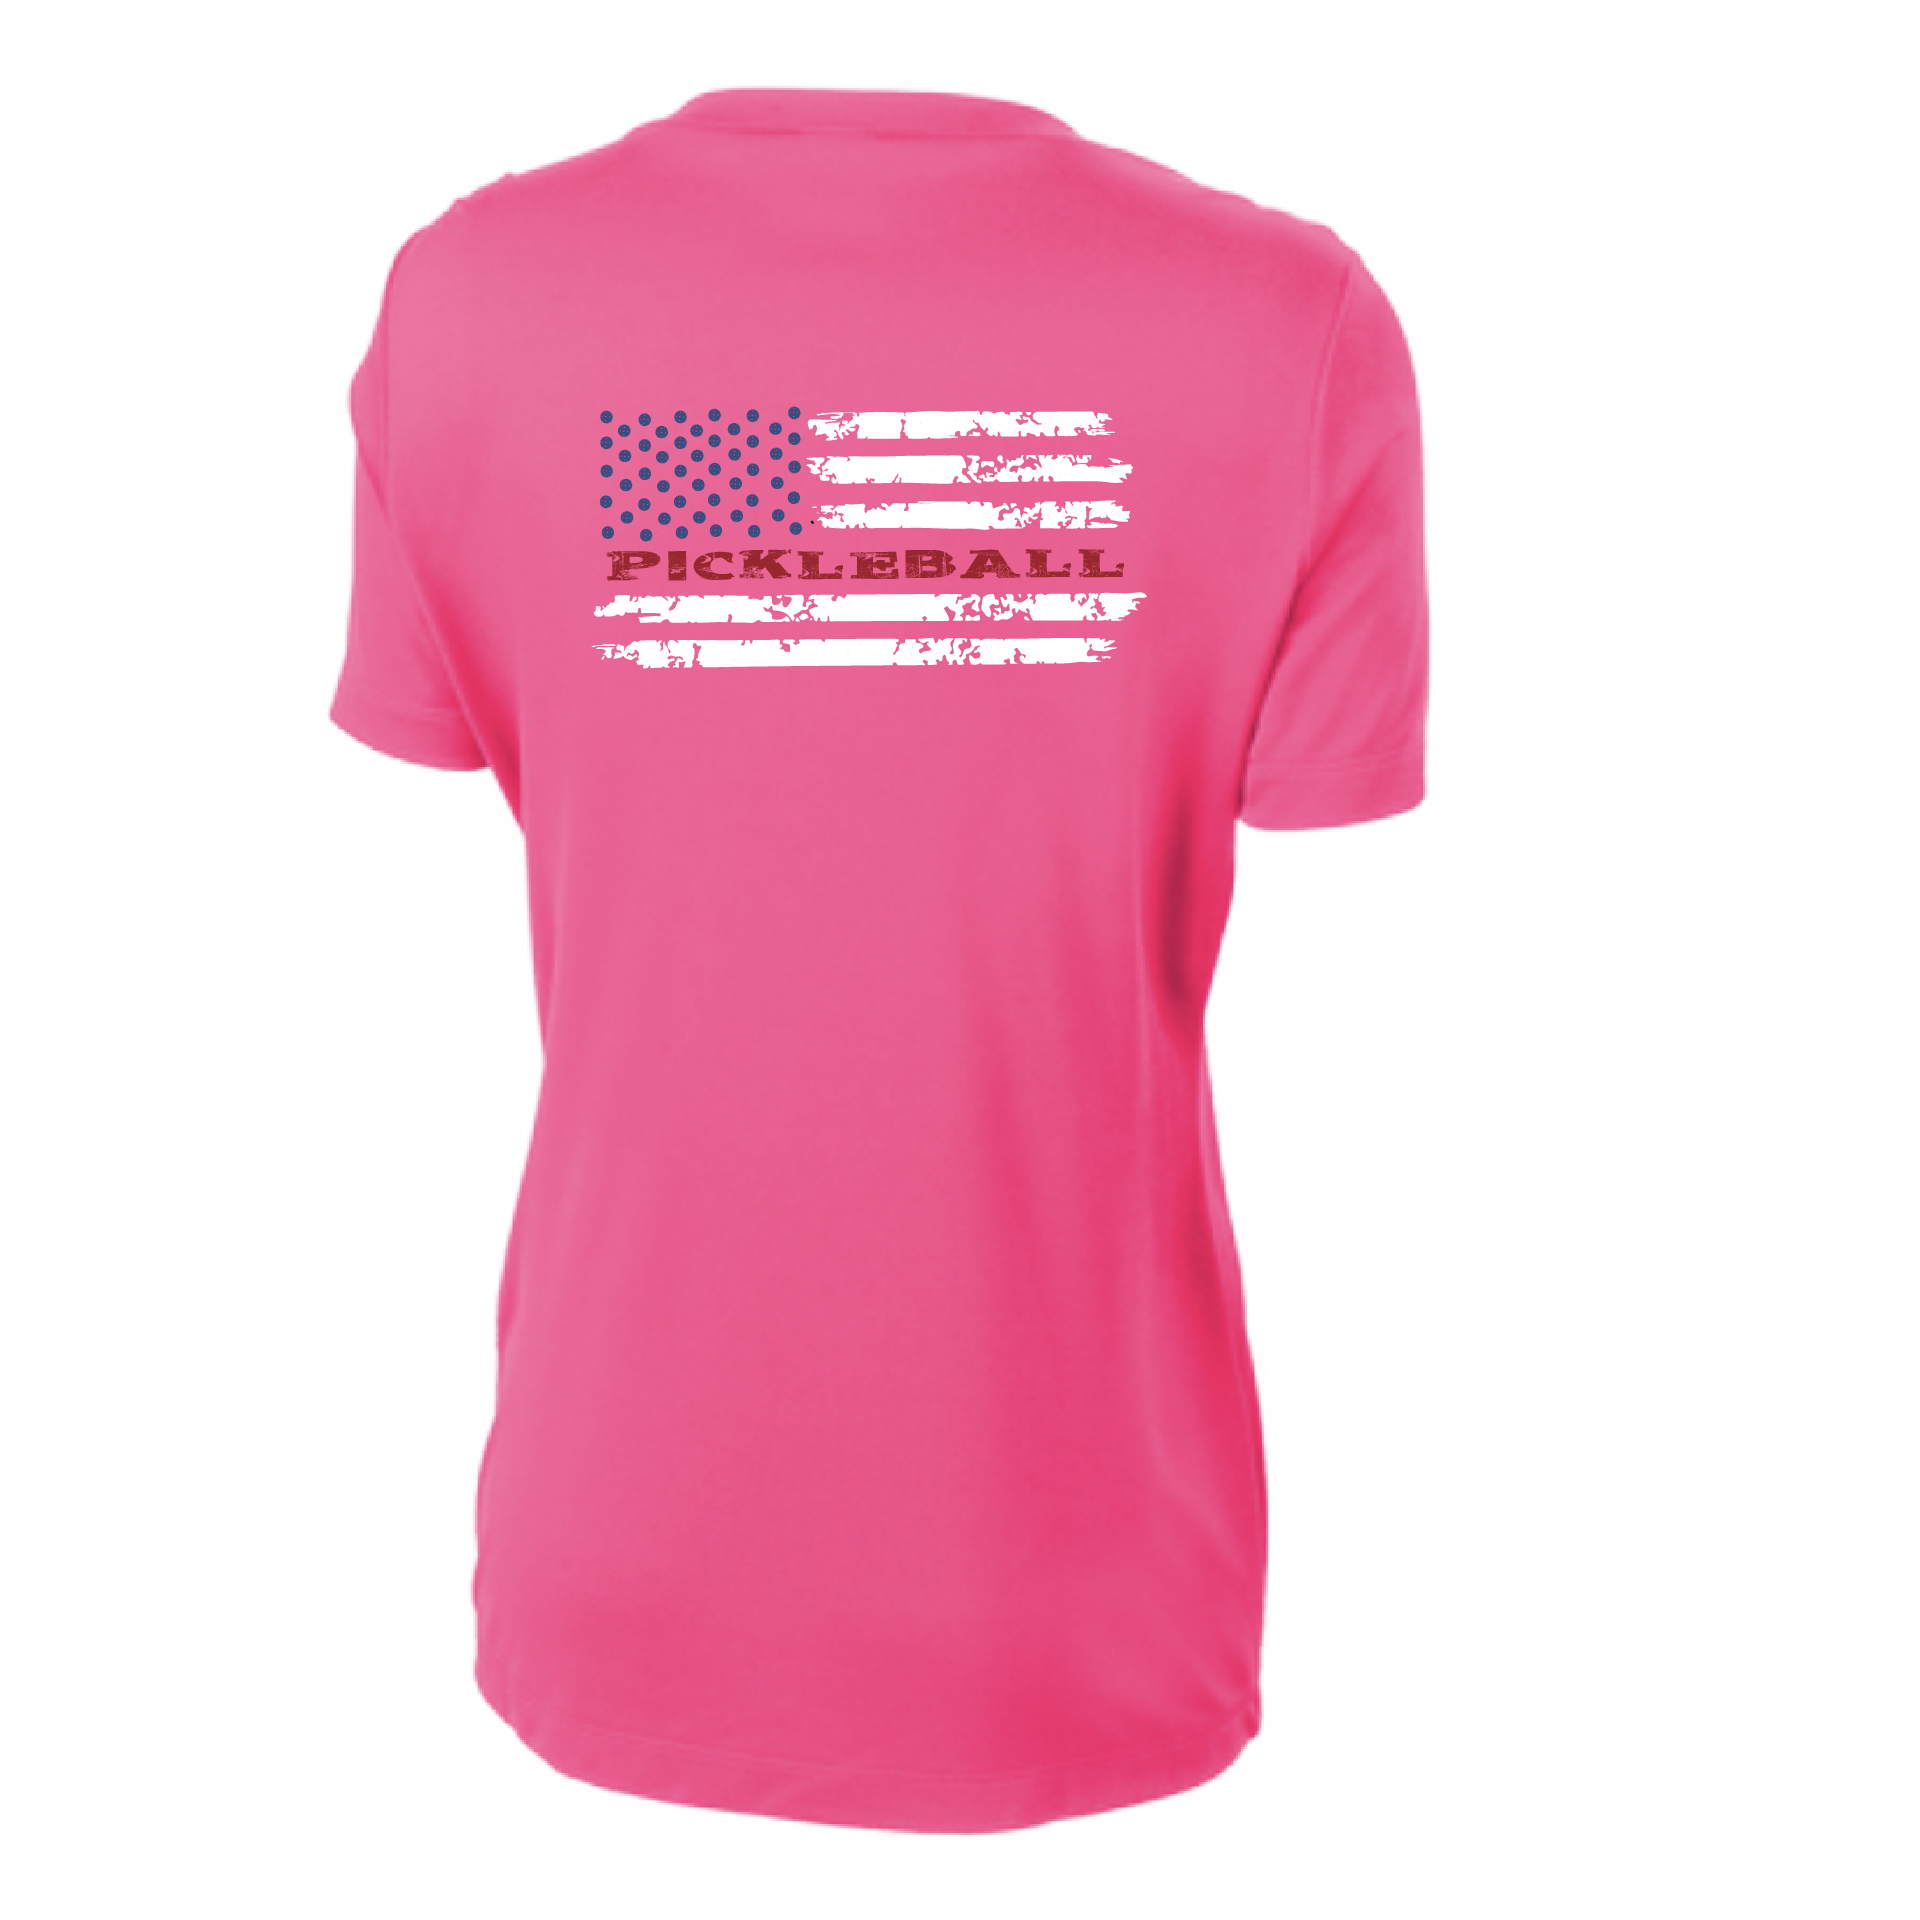 Pickleball Design: Flag Horizontal on Front or Back of Shirt  Women's Style: Short-Sleeve Crew-Neck  Turn up the volume in this Women's shirt with its perfect mix of softness and attitude. Material is ultra-comfortable with moisture wicking properties and tri-blend softness. PosiCharge technology locks in color. Highly breathable and lightweight.